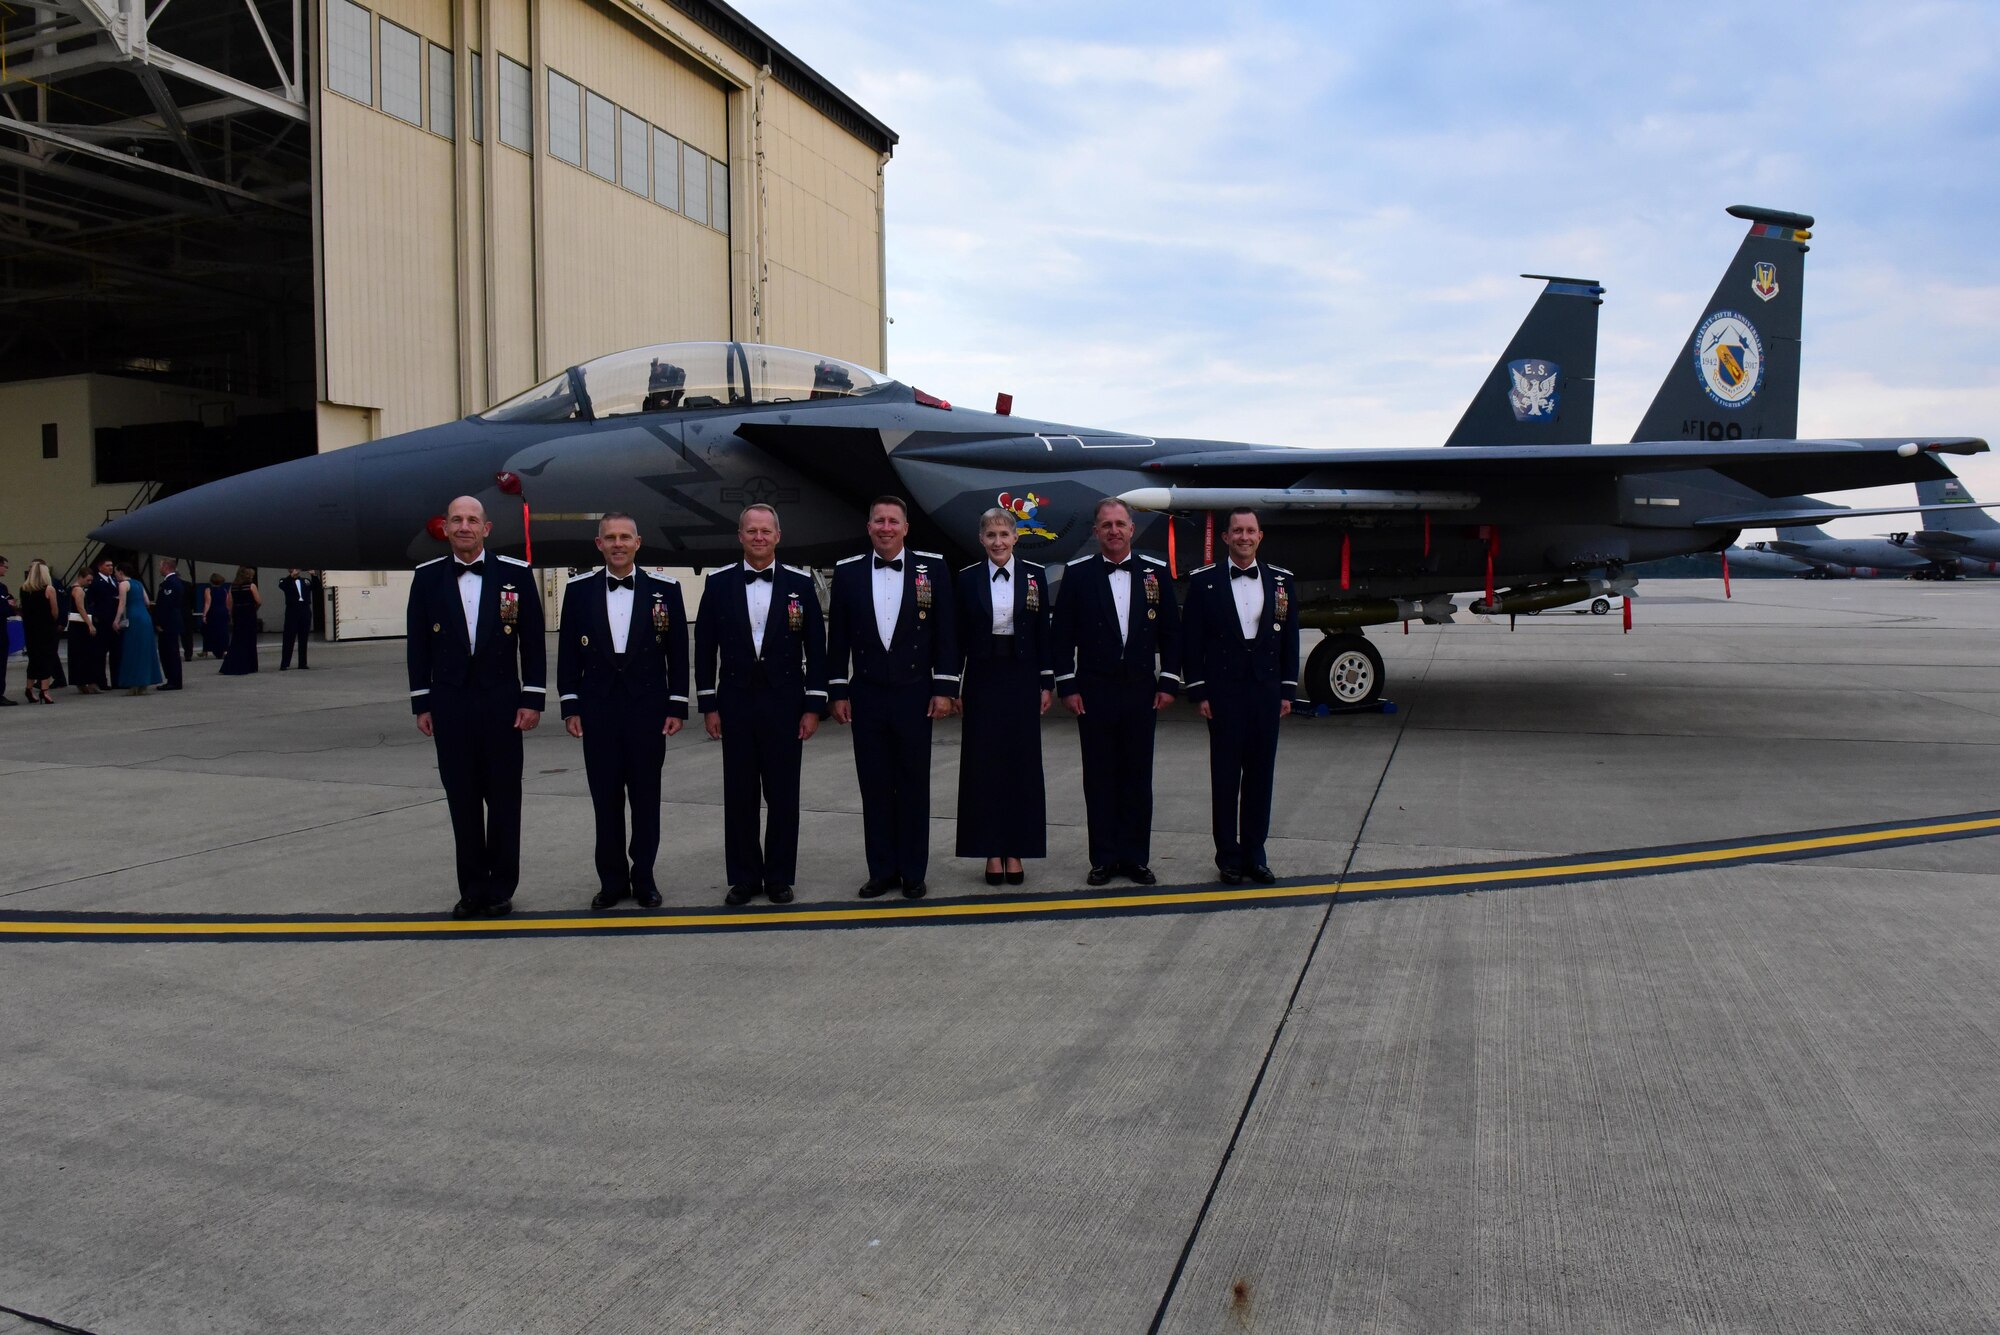 Previous 4th Fighter Wing commanders joined Col. Christopher Sage, current 4 FW commander, and Gen. Mike Holmes, commander of Air Combat Command, for the 75th Anniversary Gala, Sept. 16, 2017, at Seymour Johnson Air Force Base, North Carolina. The 4 FW traces its roots to the Royal Air Force during World War II and was transferred to the U.S. Army Air Forces on Sept. 12, 1942. (U.S. Air Force photo by Airman 1st Class Victoria Boyton)